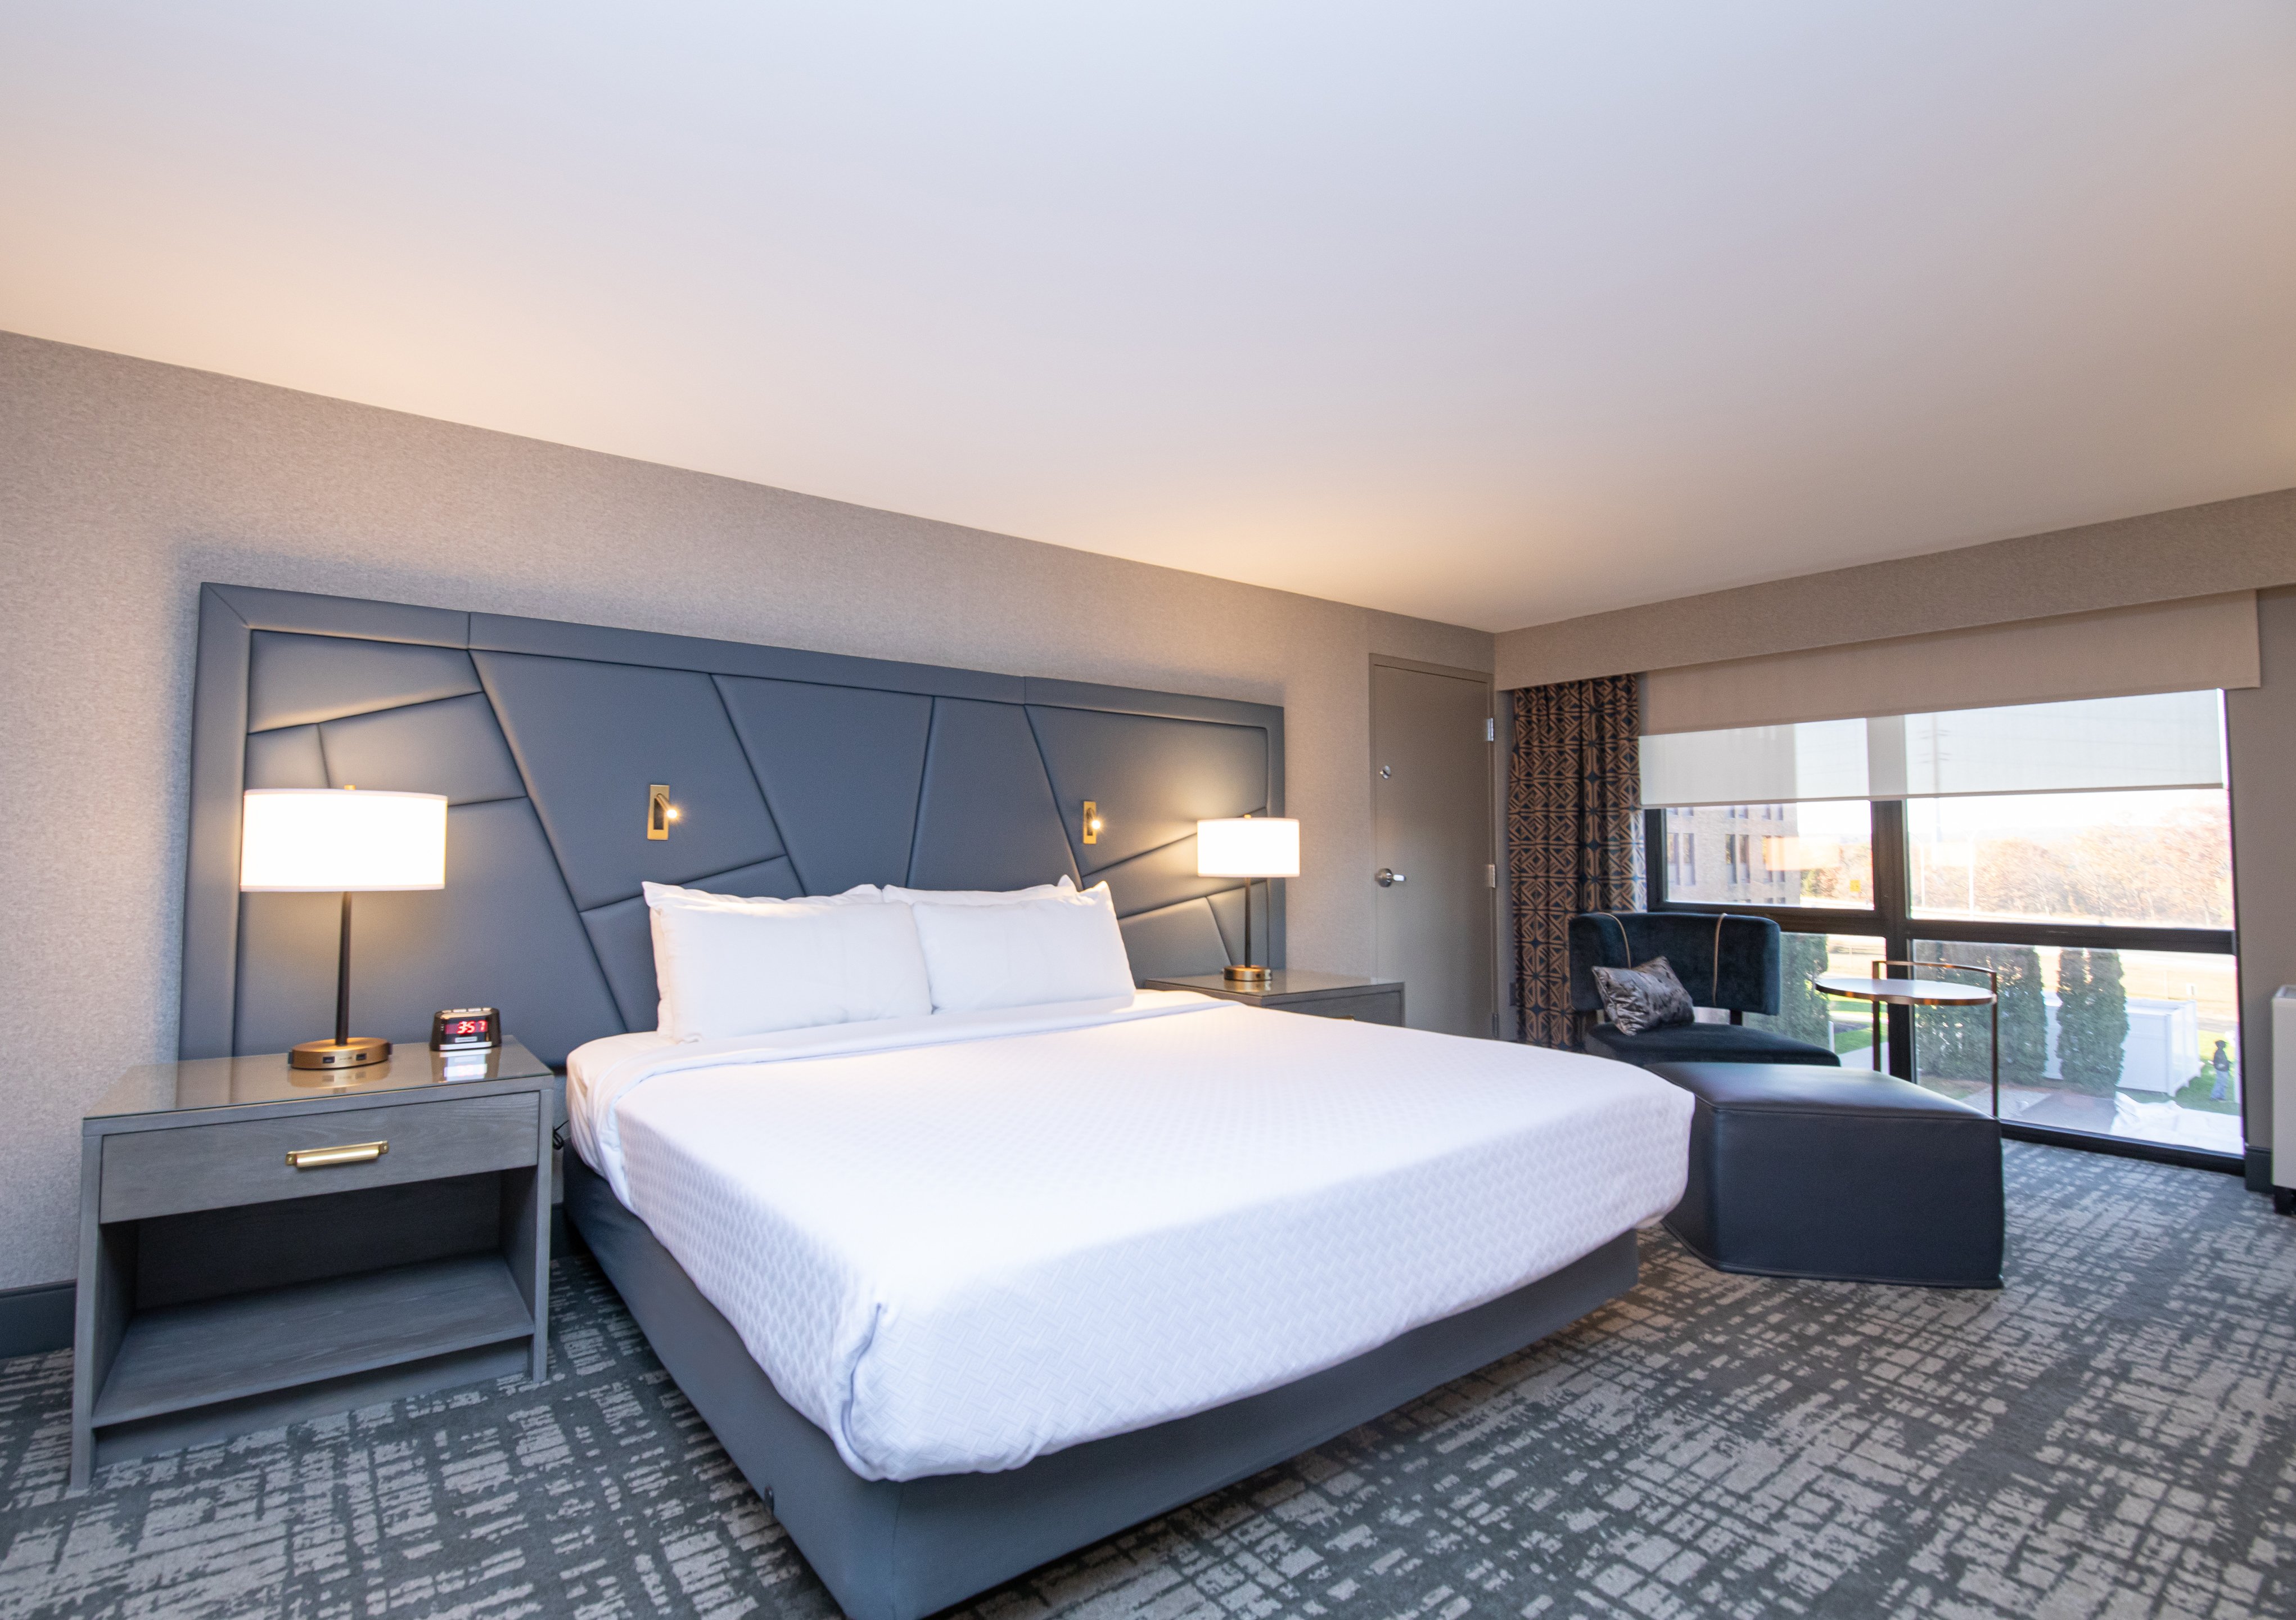 Enjoy and relax in our comfortable king-size bed.